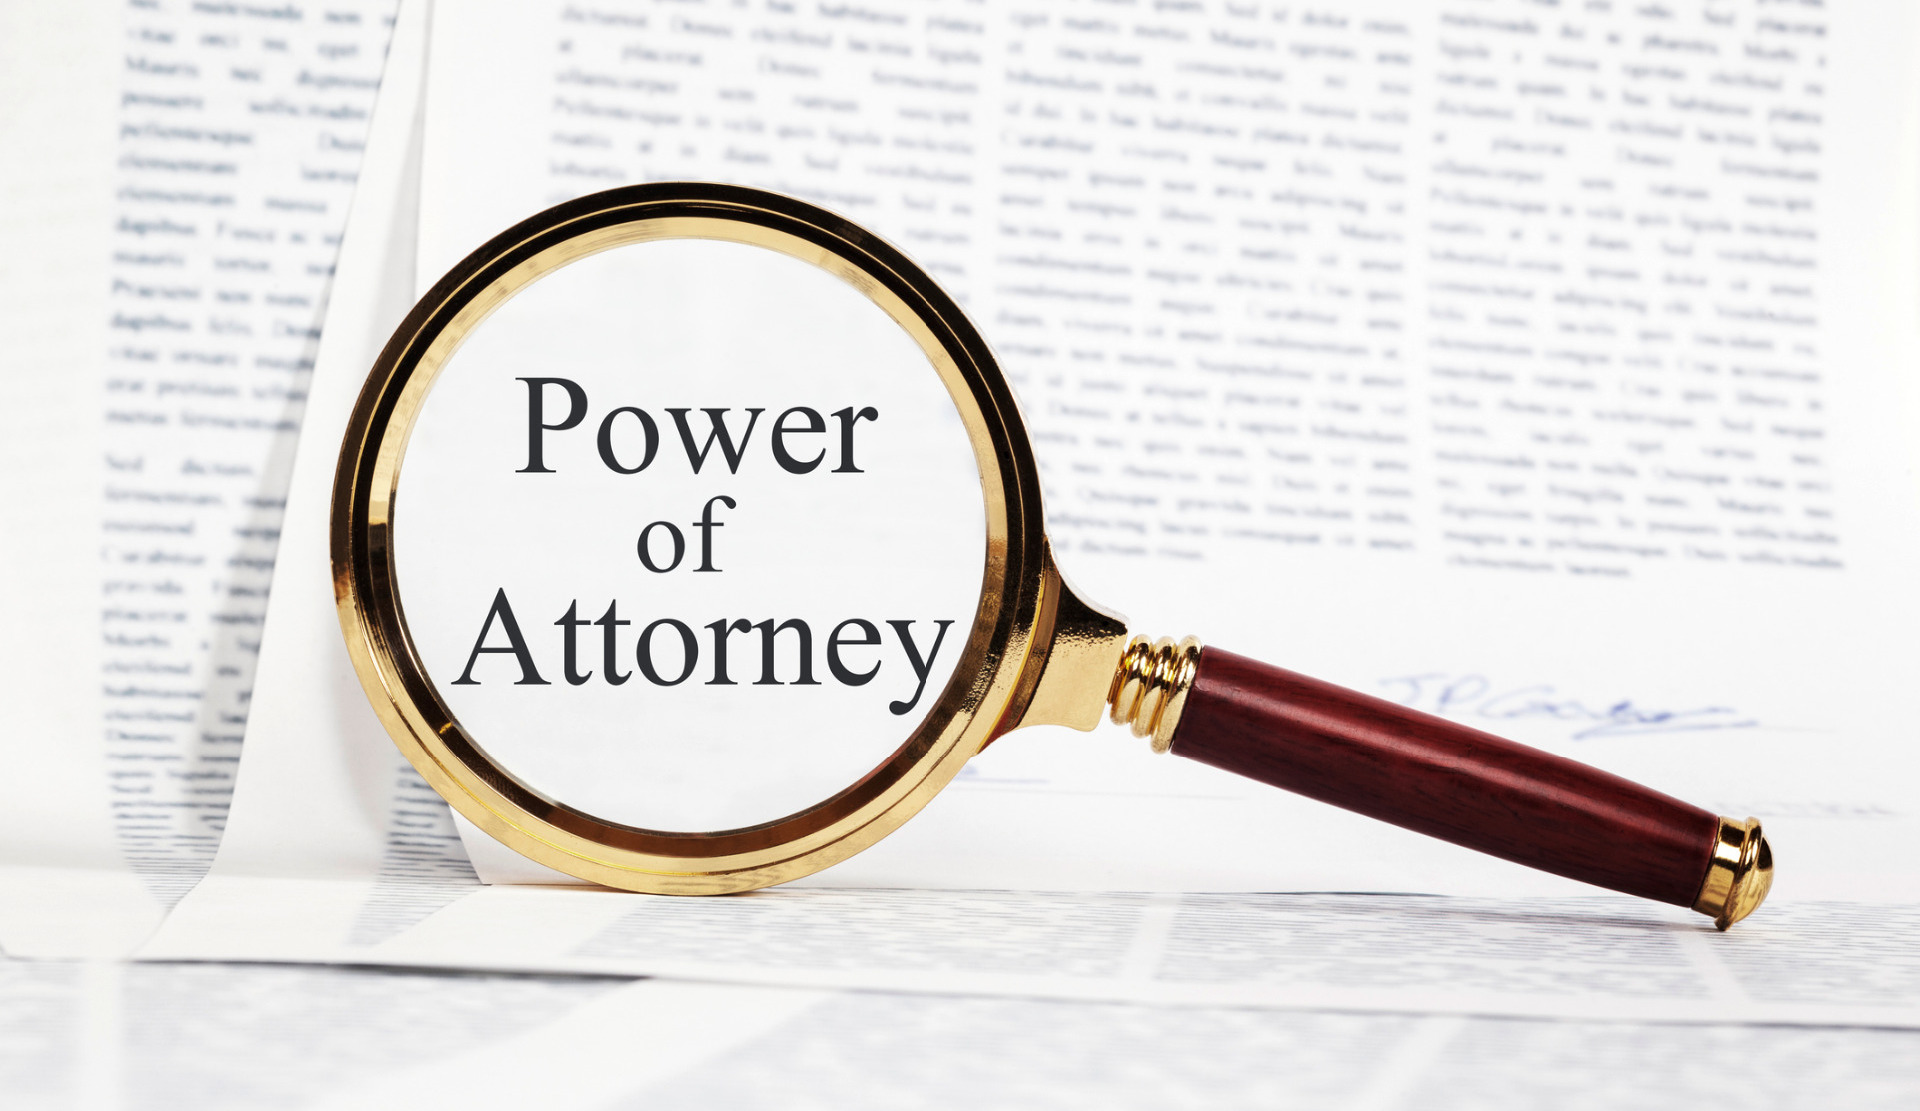 A magnifying glass showing 'Power of Attorney' over a pile of papers.